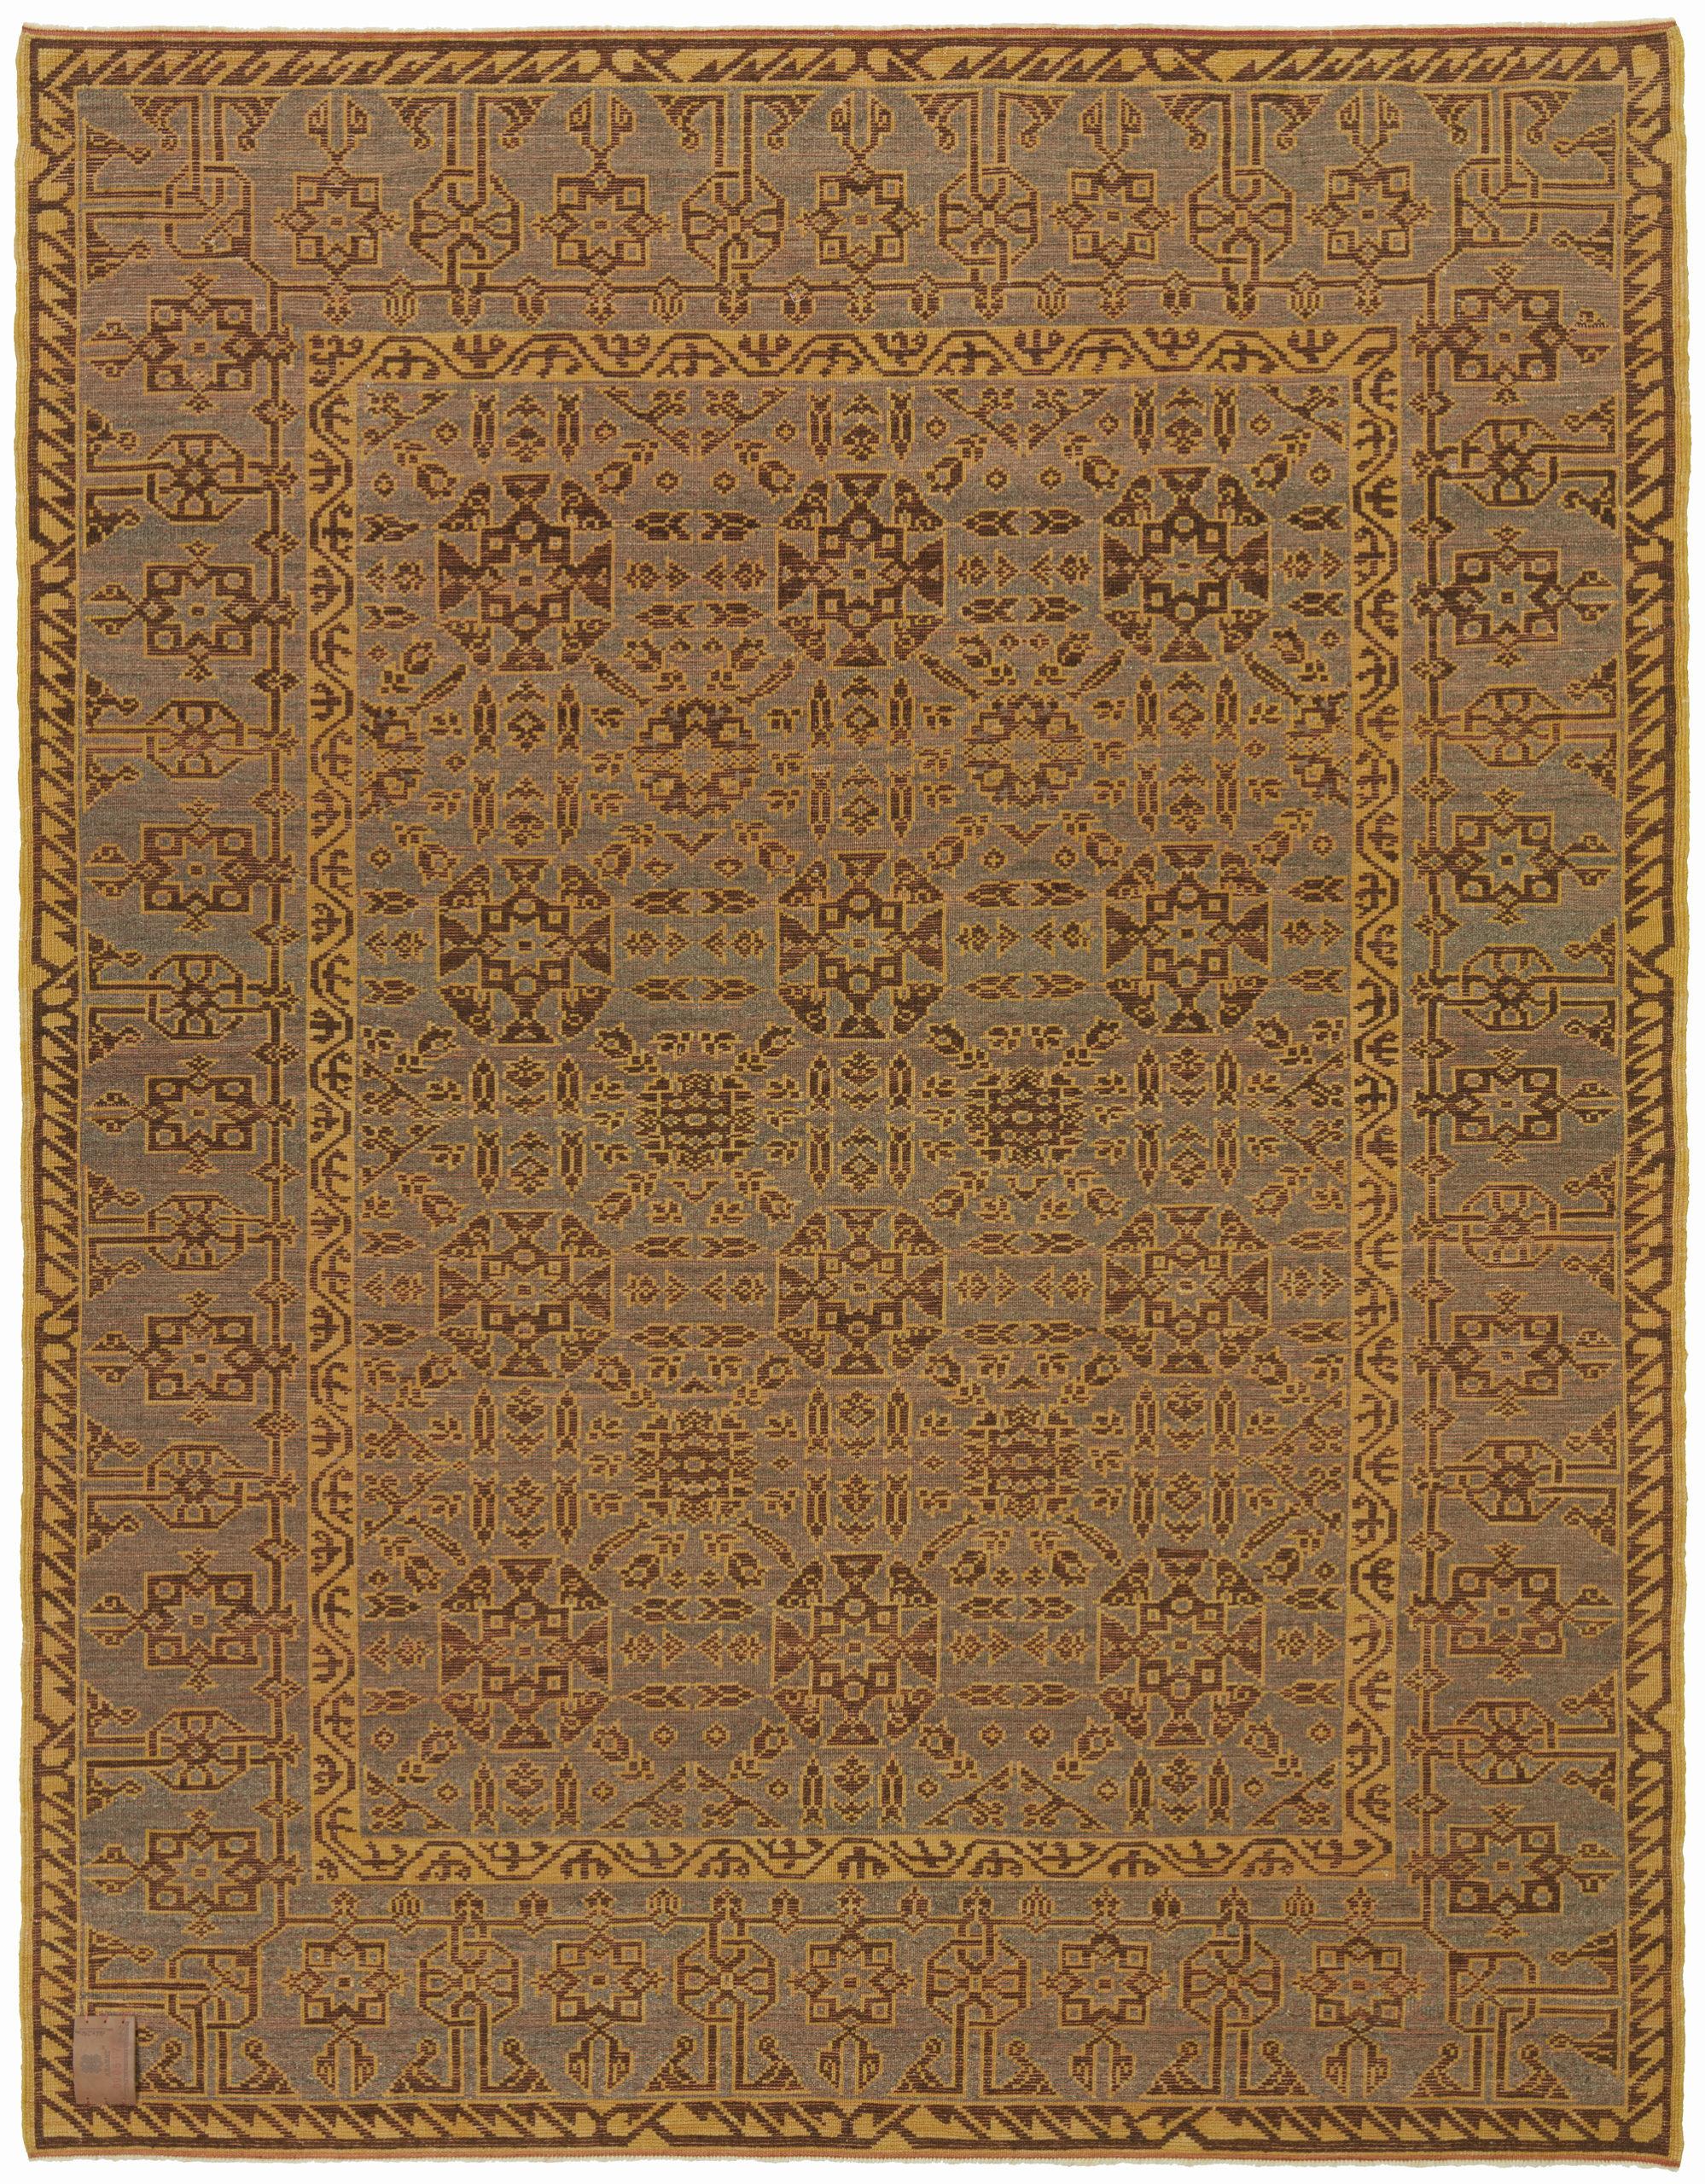 The design source of the carpet comes from the book Turkish Carpets from the 13th – 18th centuries, Ahmet Ertuğ, 1996 pl.9. This 13th-century carpet is from Ulu Mosque, Divrigi Sivas region, central Anatolia. The Seljuk period marks one of the